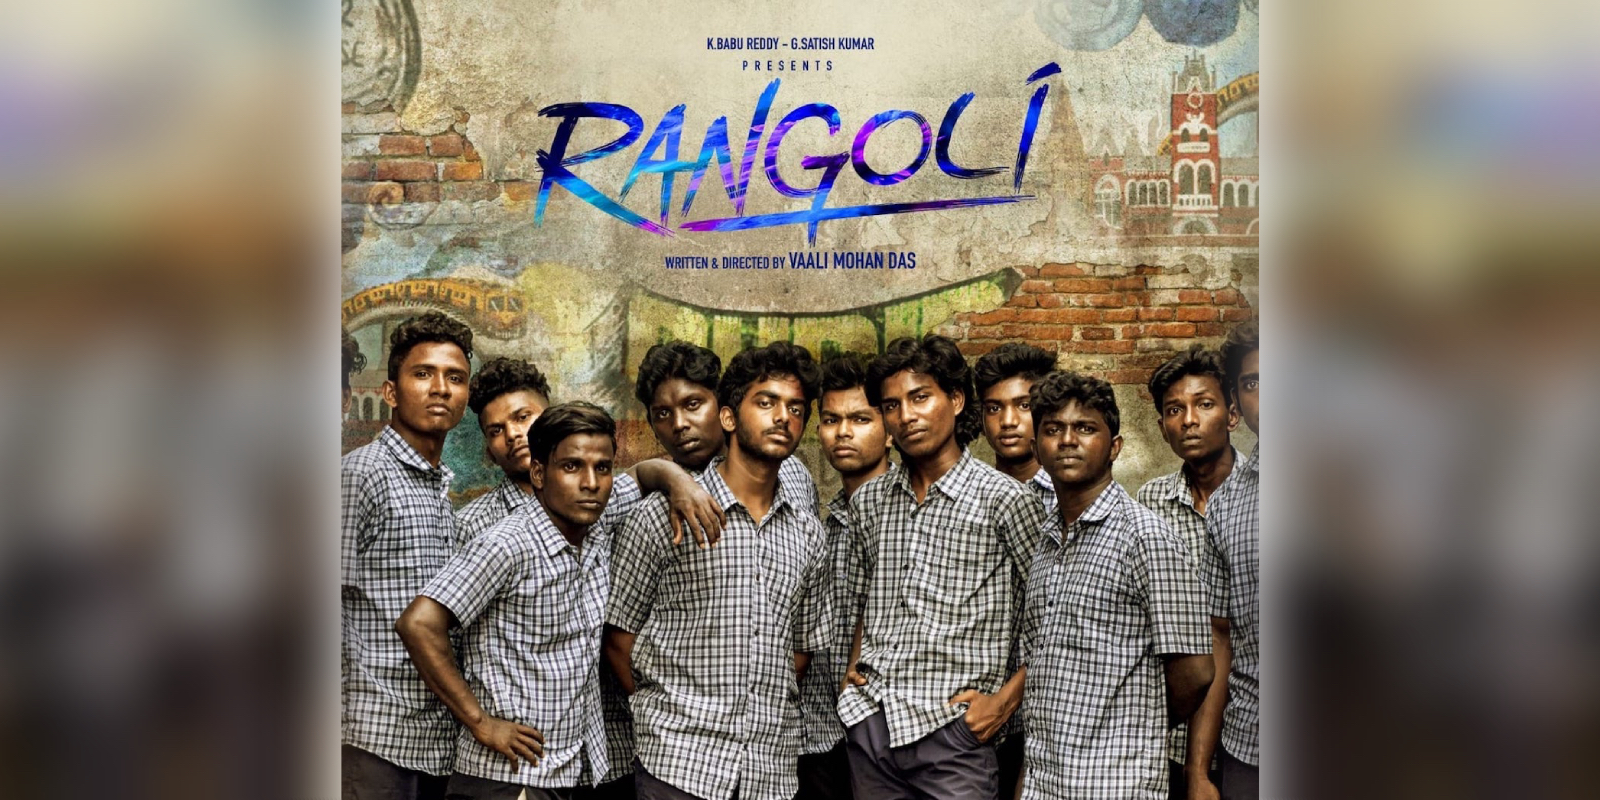 Rangoli review: Director Vaali Mohan Das’ family drama is rooted in reality